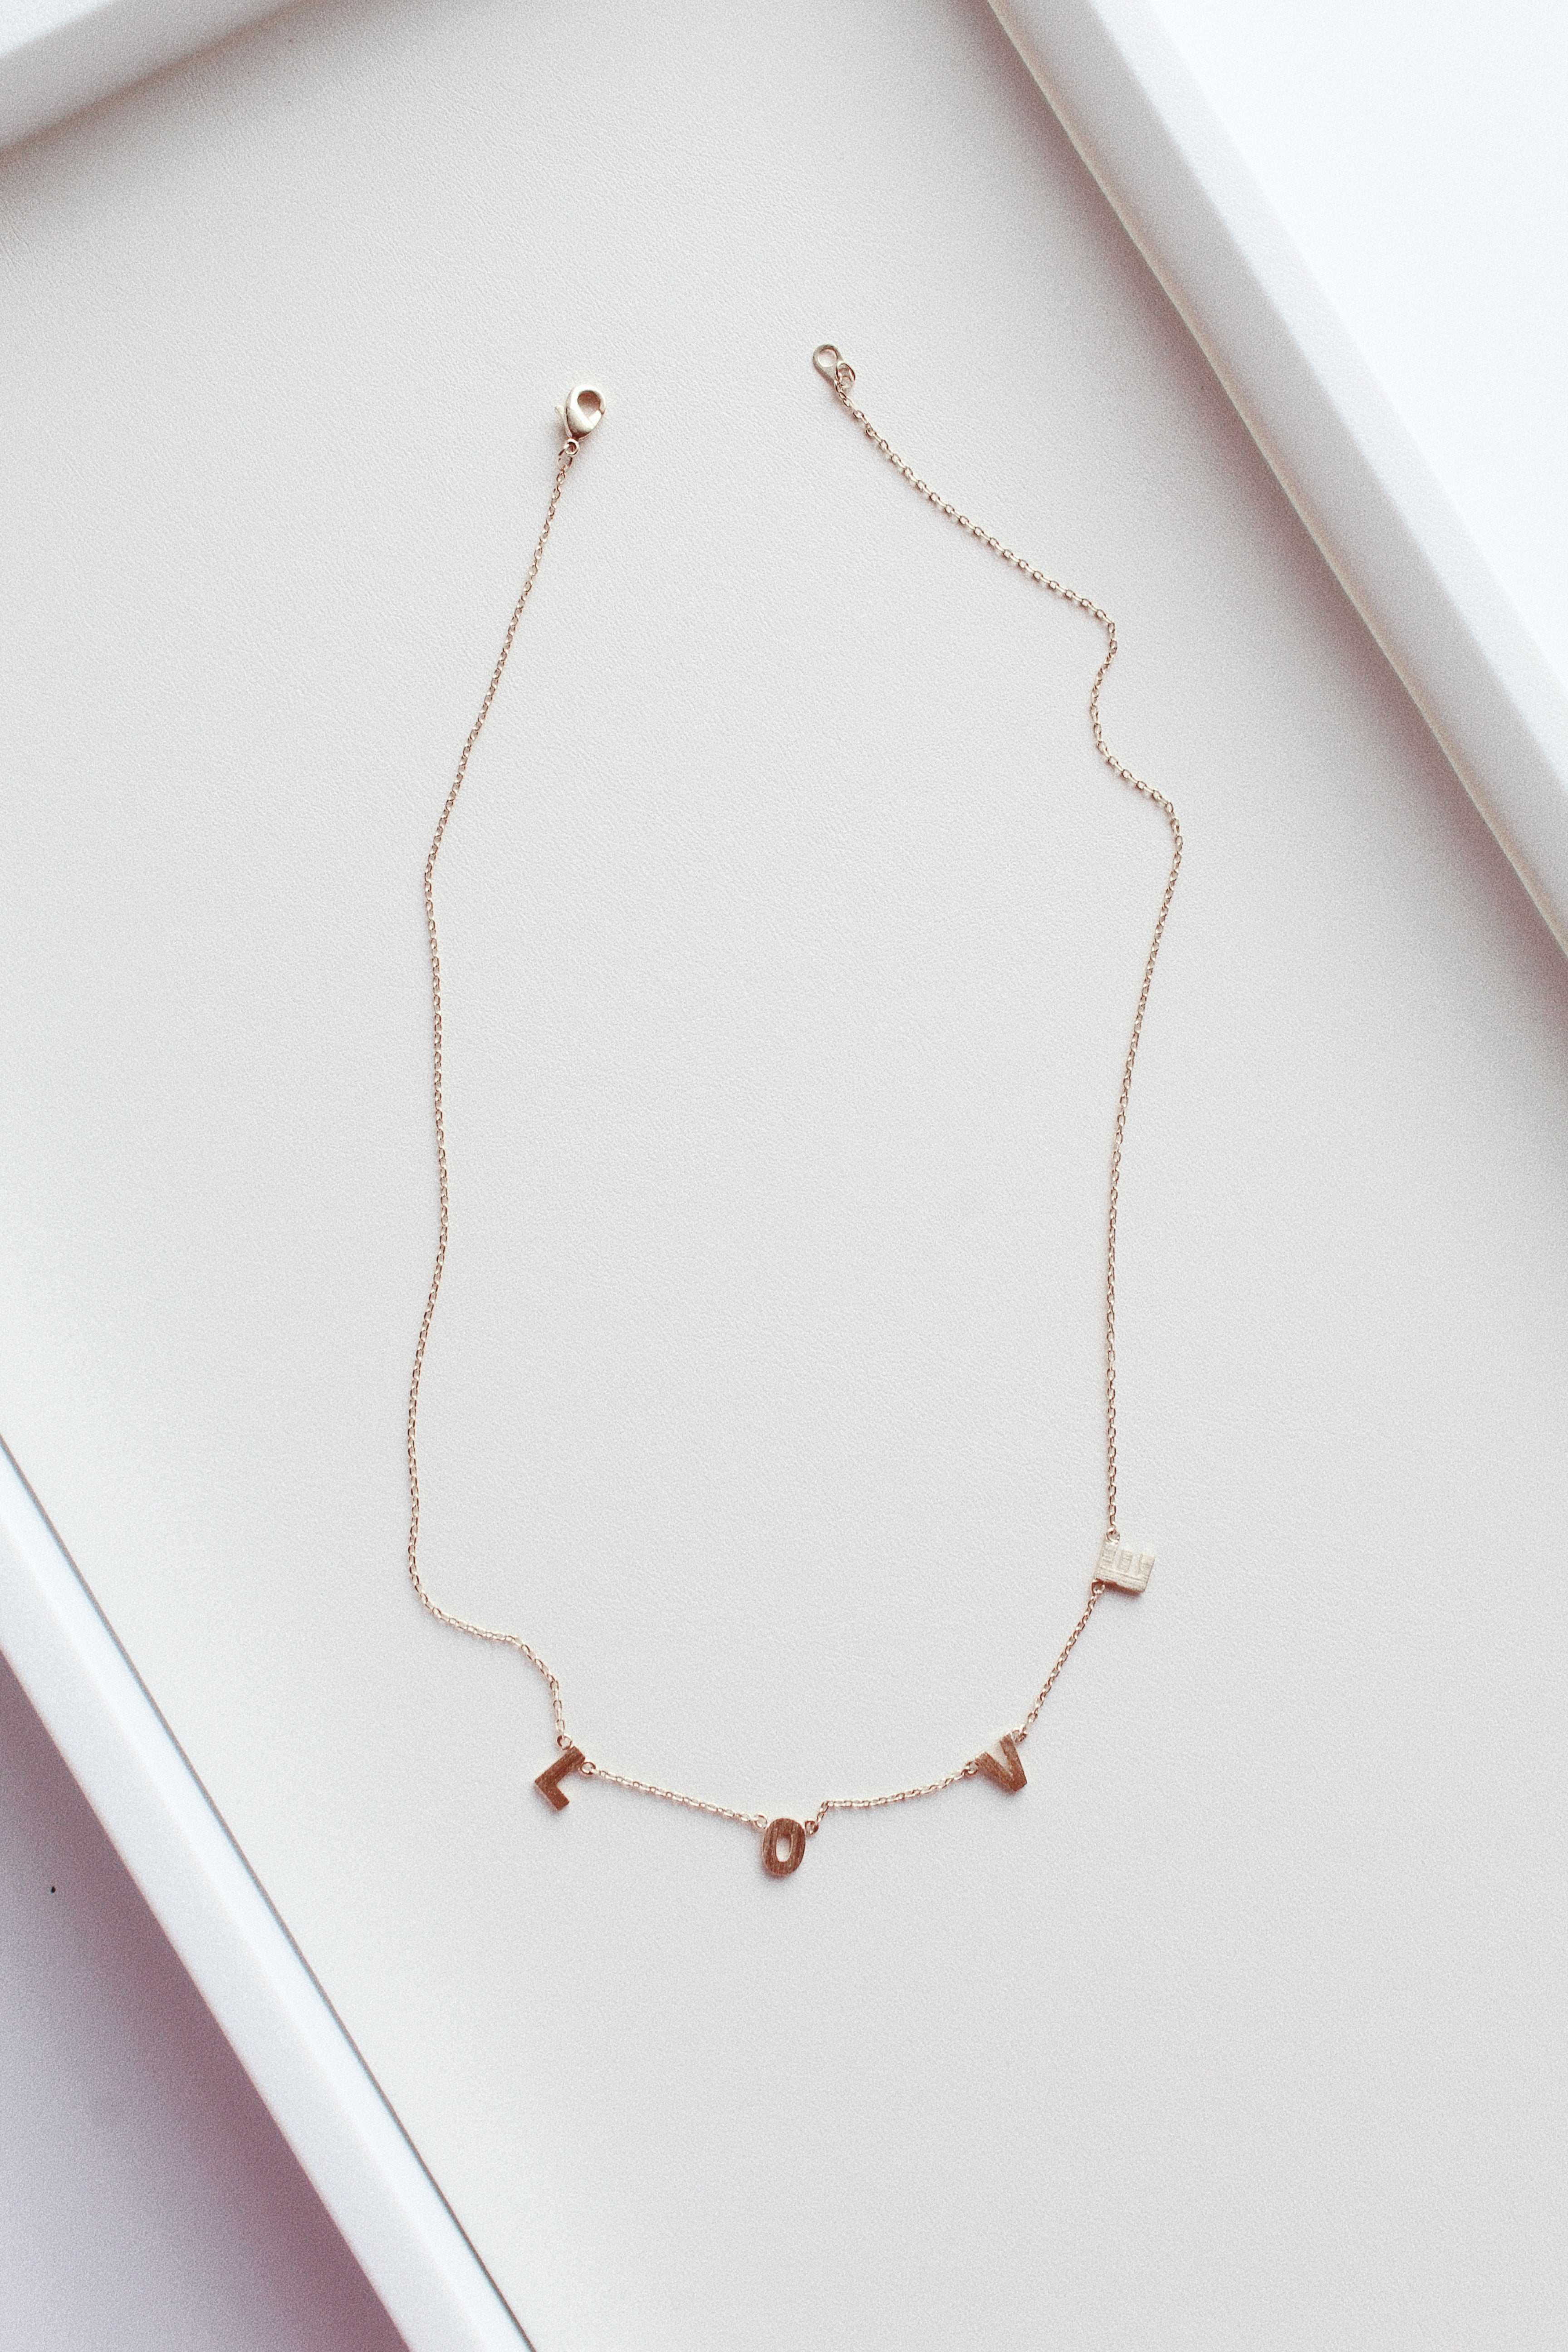 Love Dainty Gold Charm Necklace